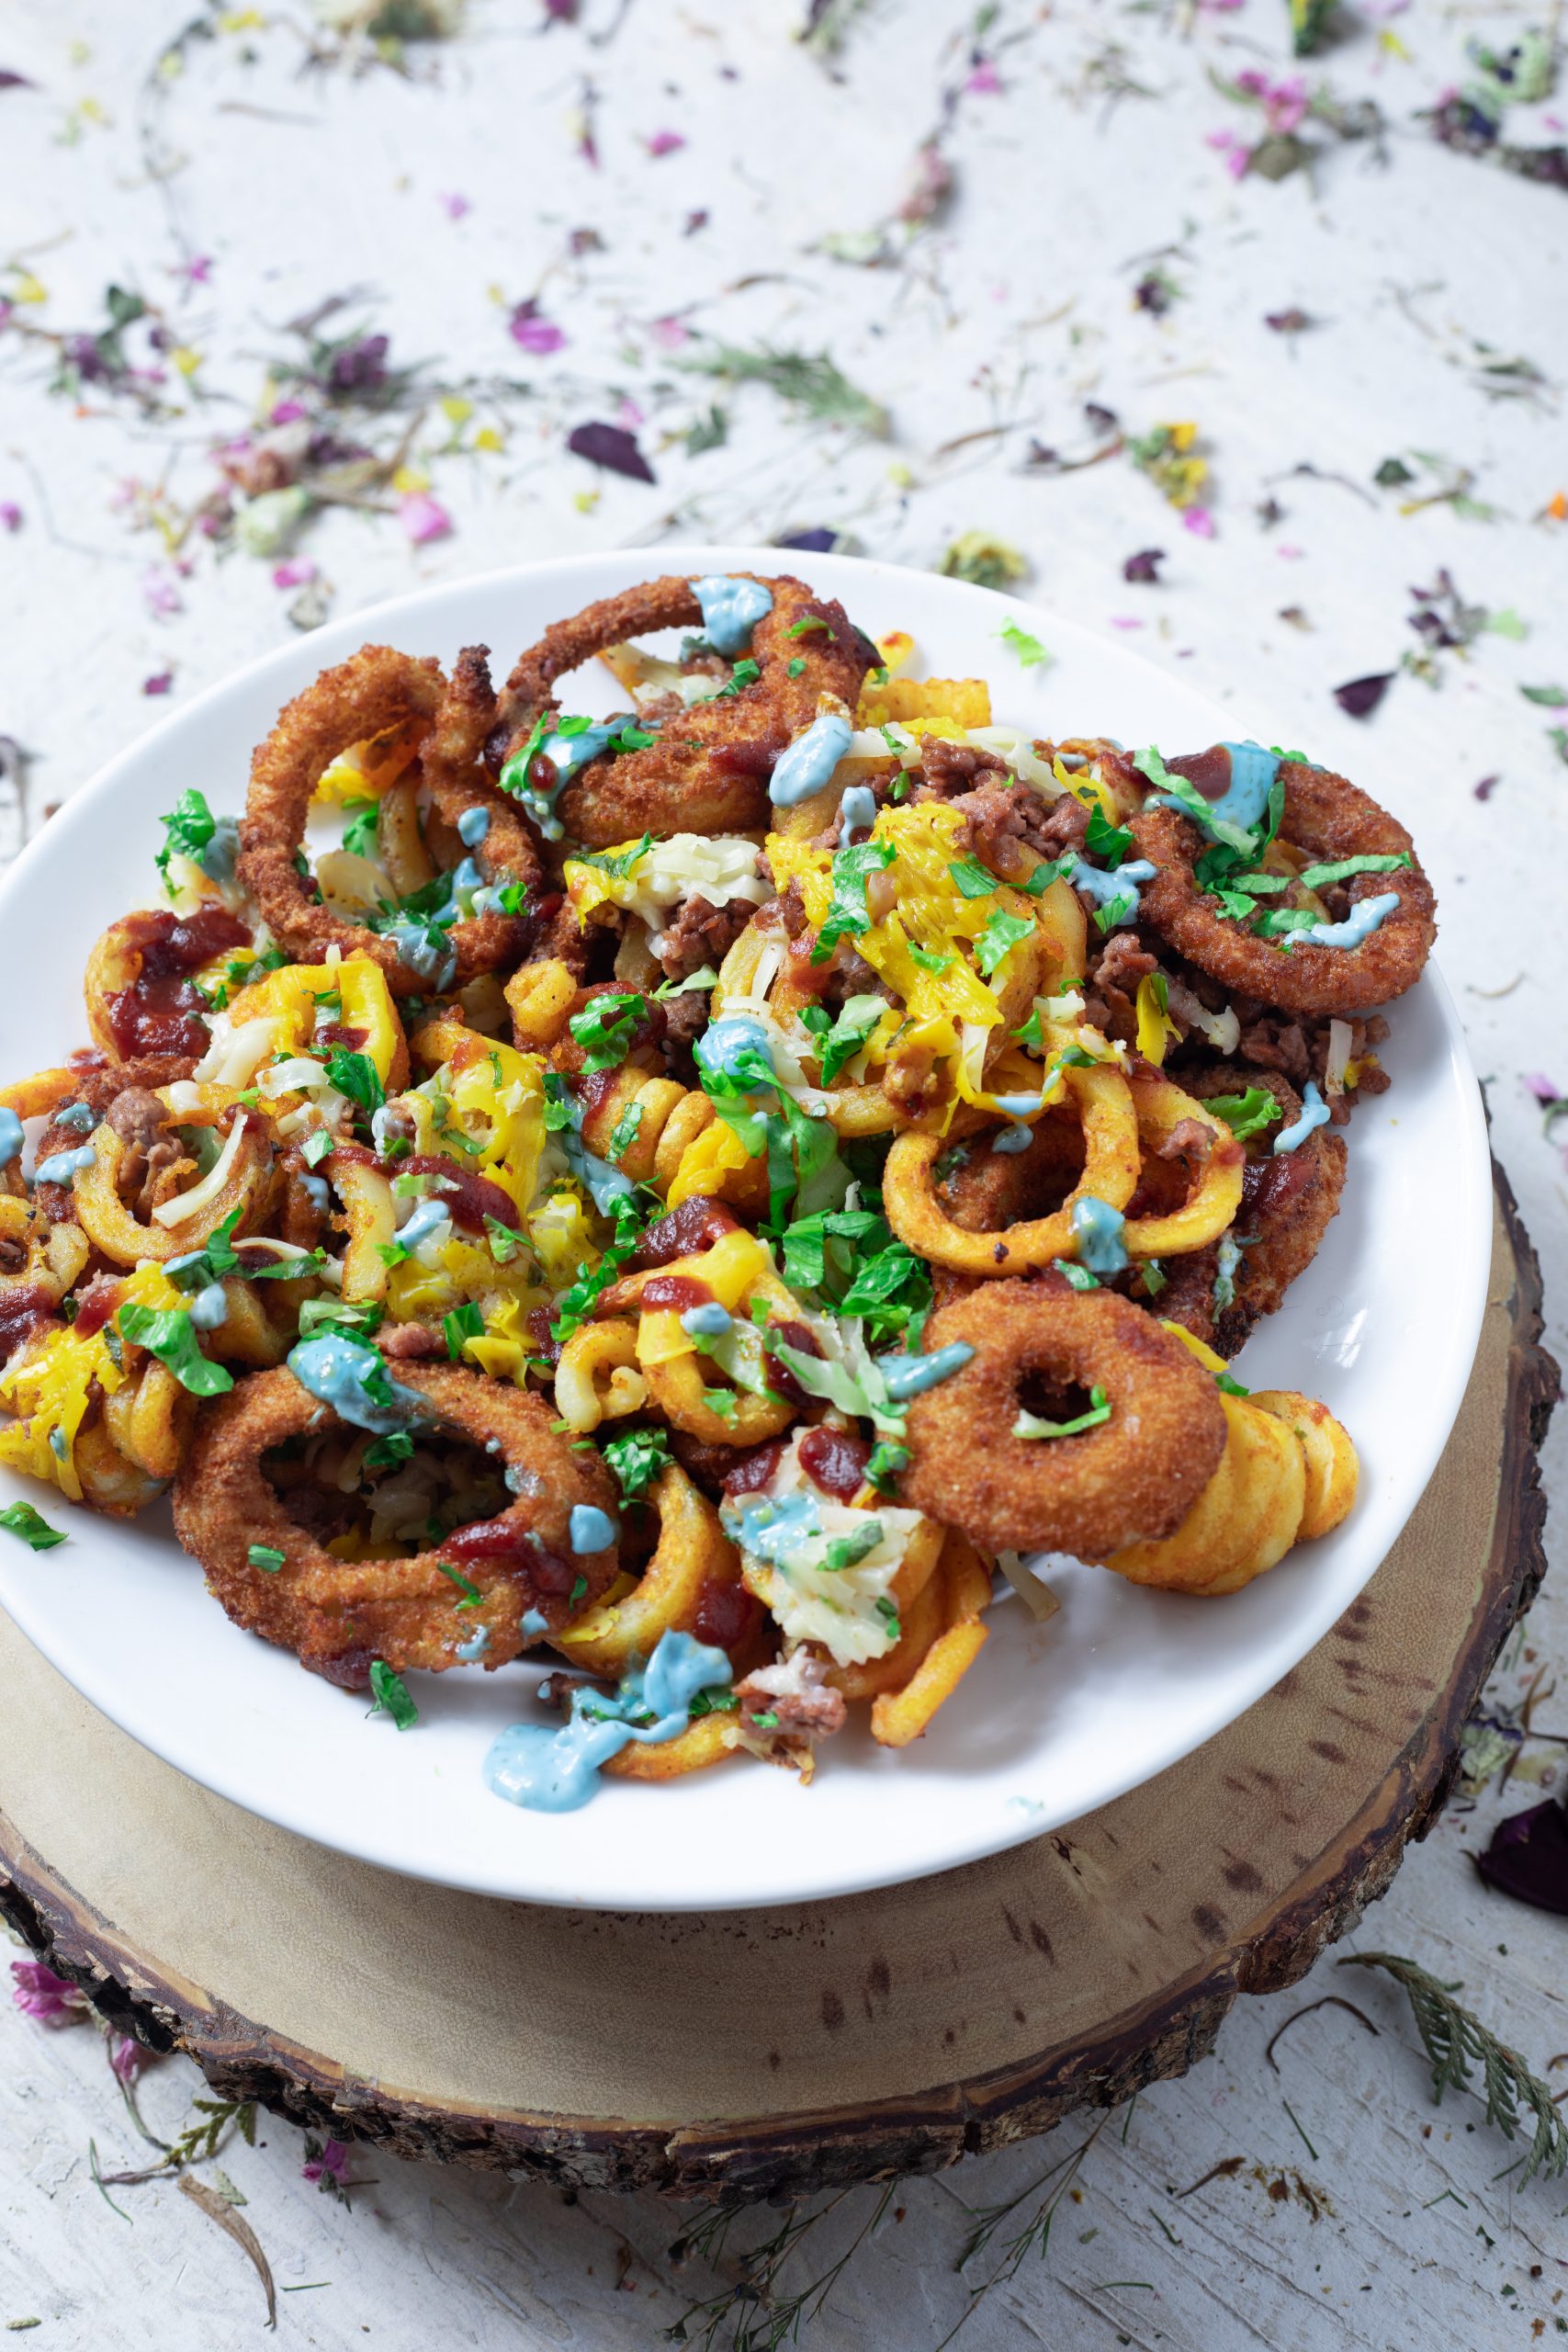 A plate of curly fries, then a layer of onion rings over the fries, then a layer of beefy crumbles, then a layer of melted plant cheddar cheese, then a layer of shredded lettuce, then a drizzle of katsup, then another drizzle of blue burger sauce